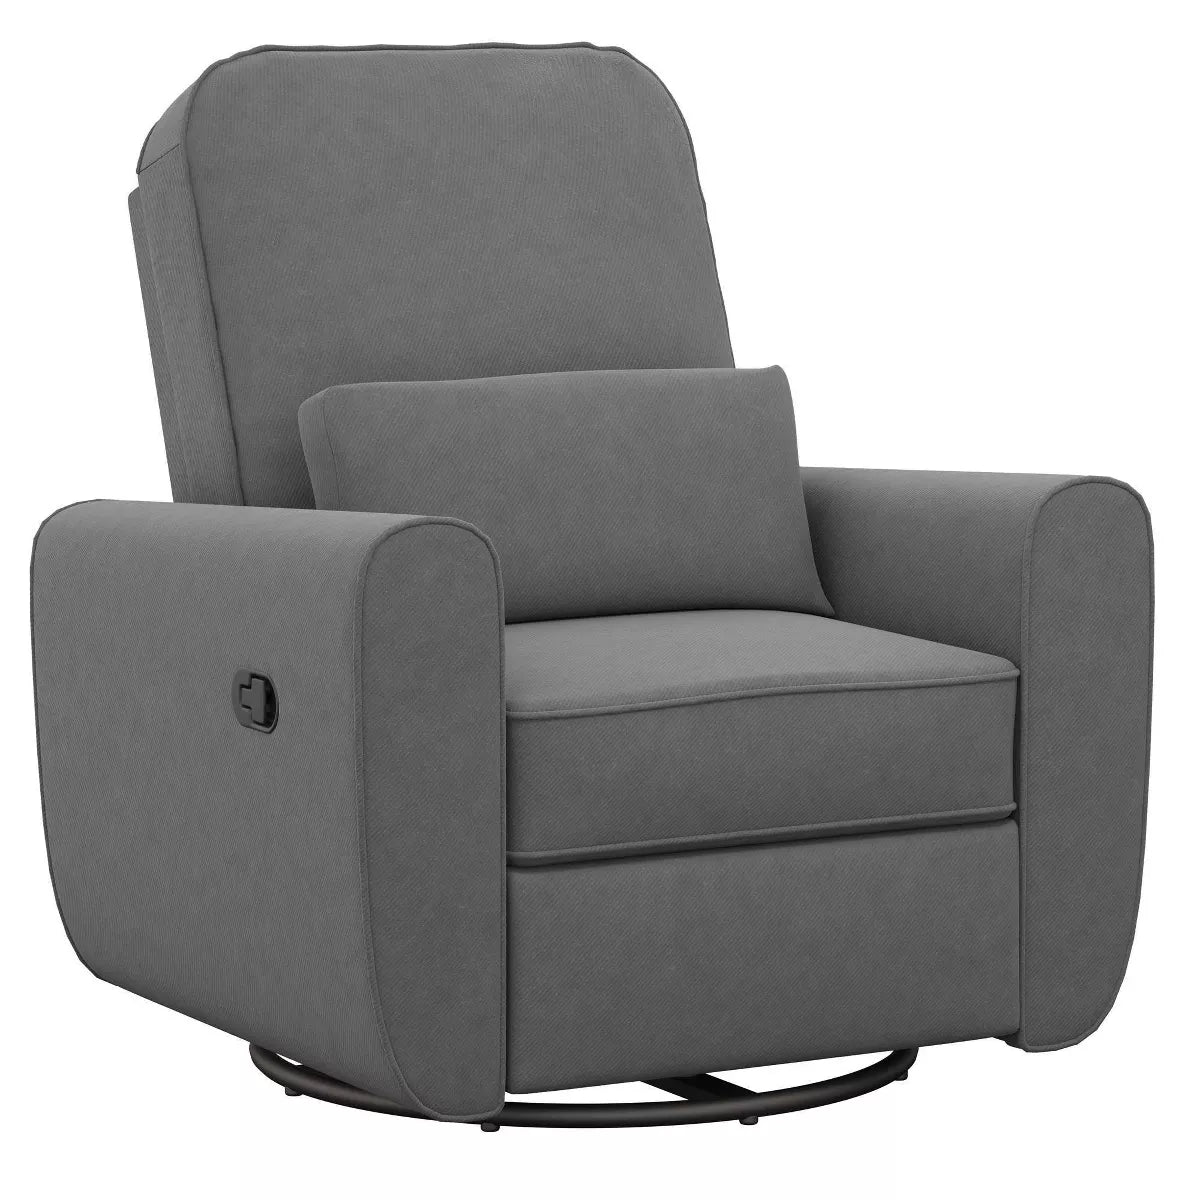 Baby Relax Kennedy Nursery Gliding Recliner Upholstered Accent Chair - Gray